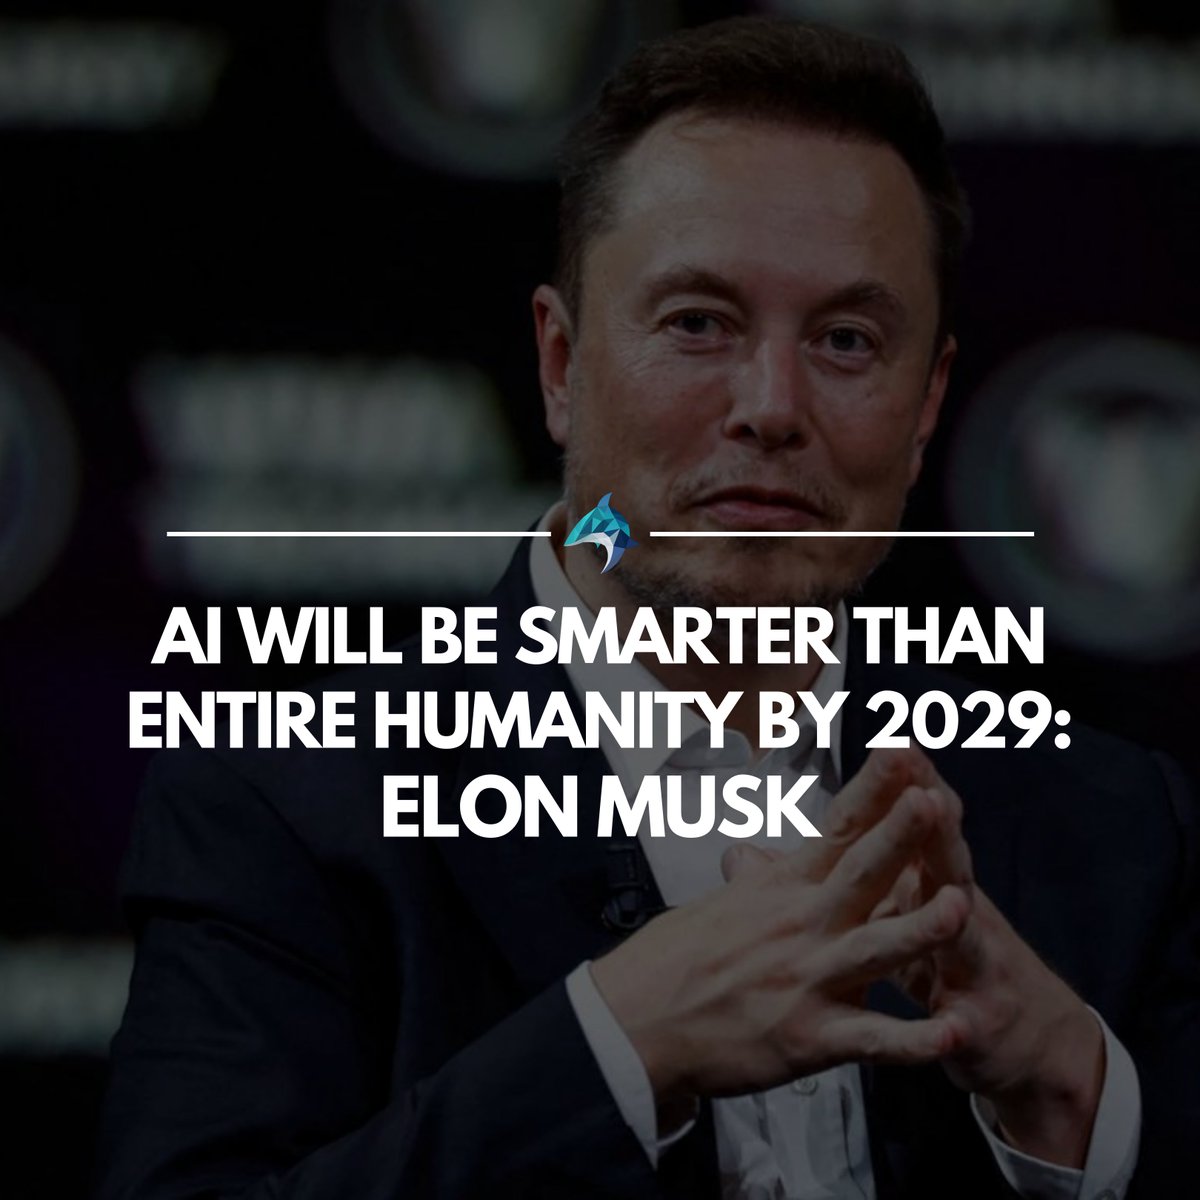 Elon Musk claims AI will outsmart us all by 2029. An ambitious forecast or a call to action for humanity's role in an AI-driven future? What's your take? 

#ArtificialIntelligence #FutureForecast